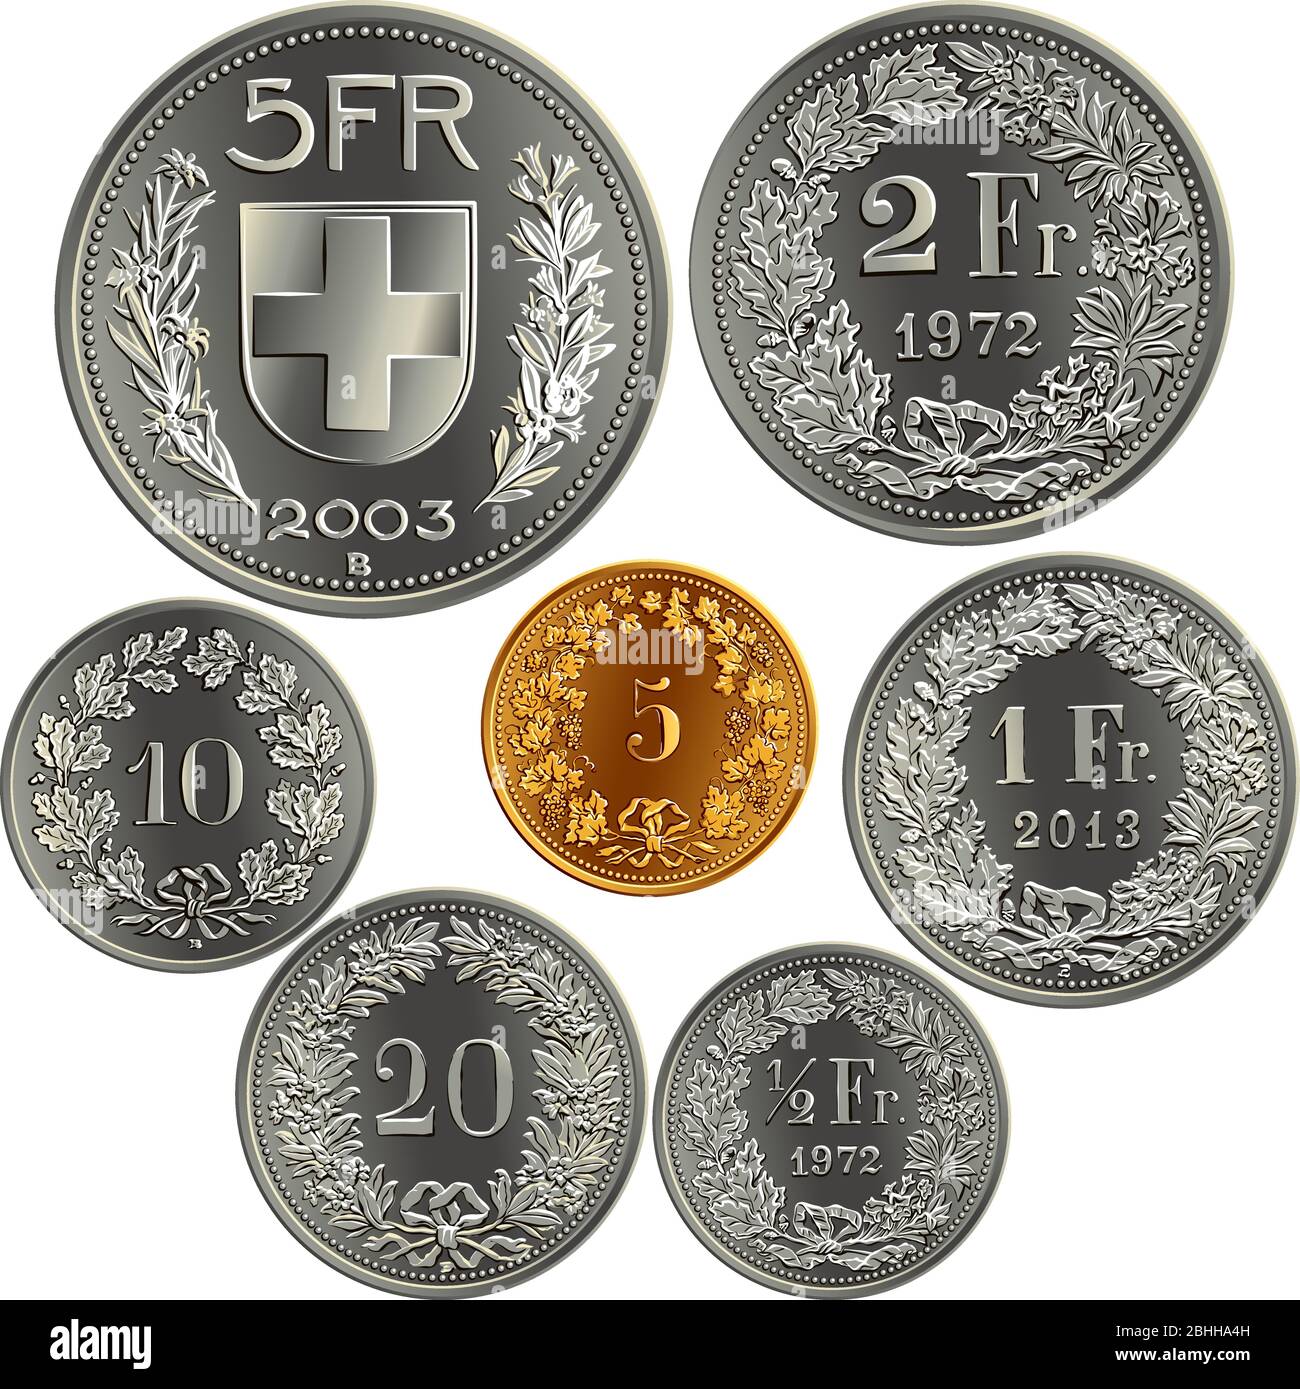 Set of Swiss Francs money, official coin in Switzerland, reverse faces with federal coat of arms, value, year, branches of plants Stock Vector